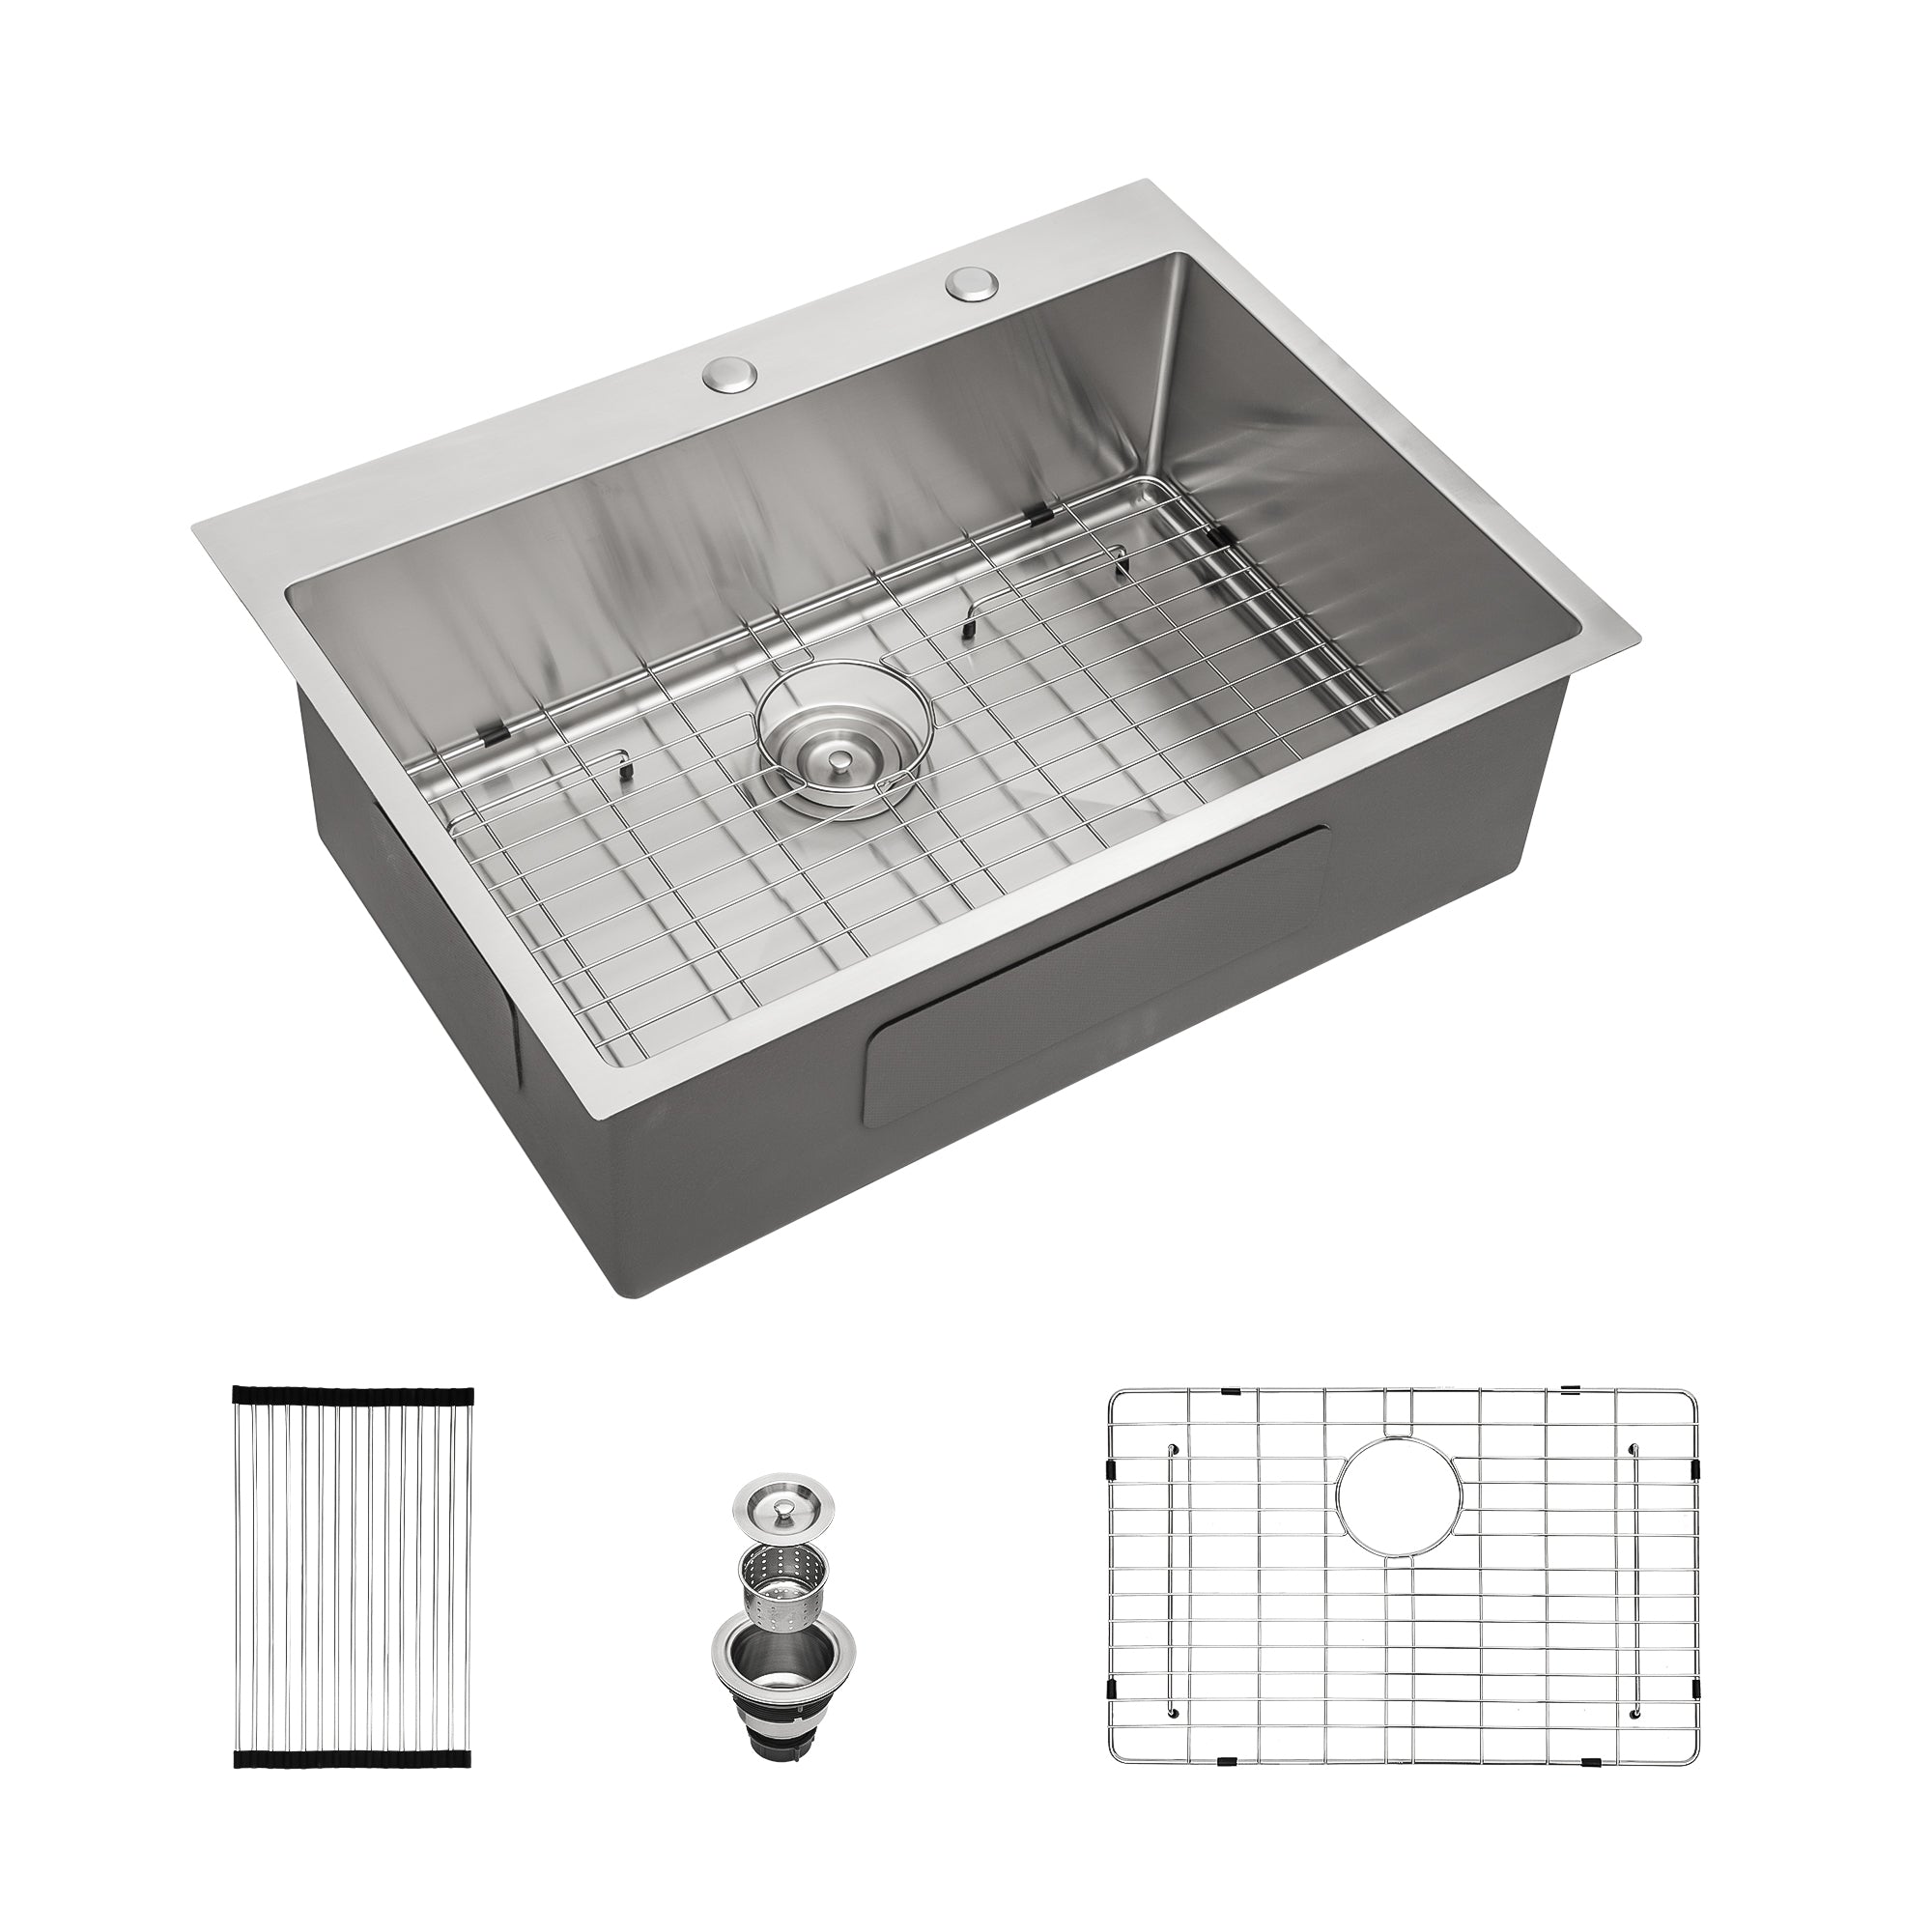 30 Inch Drop In Kitchen Sink 16 Gauge Stainless Steel Single Bowl Sink with Bottom Grid and Strainer from Lordear